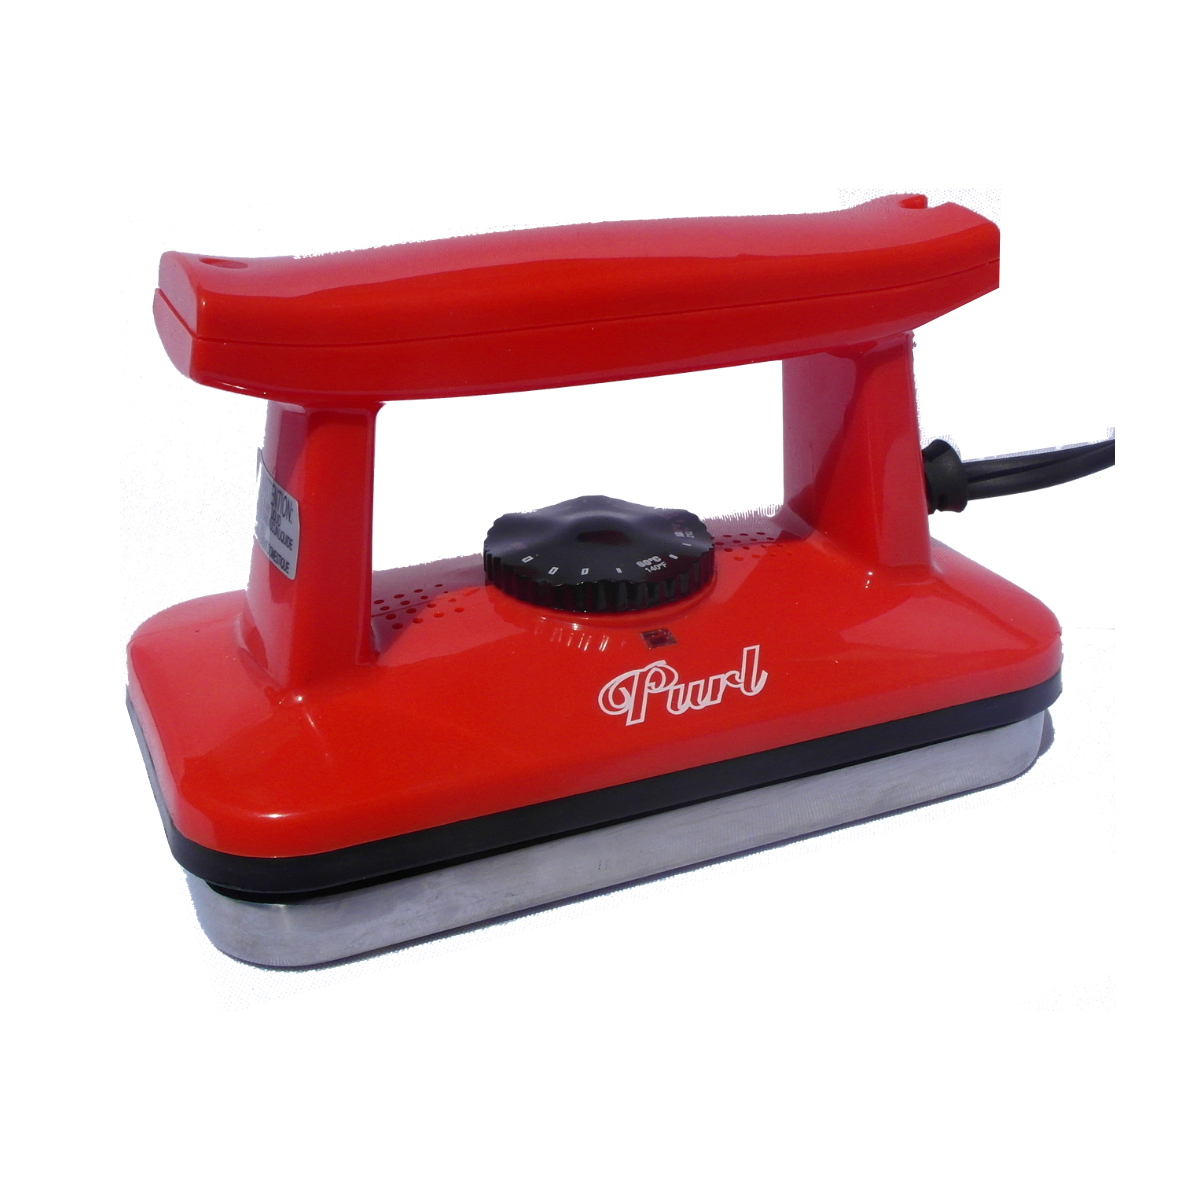 Product shot of the Purl Wax Iron, a red ski wax iron for consistent and efficient wax application.